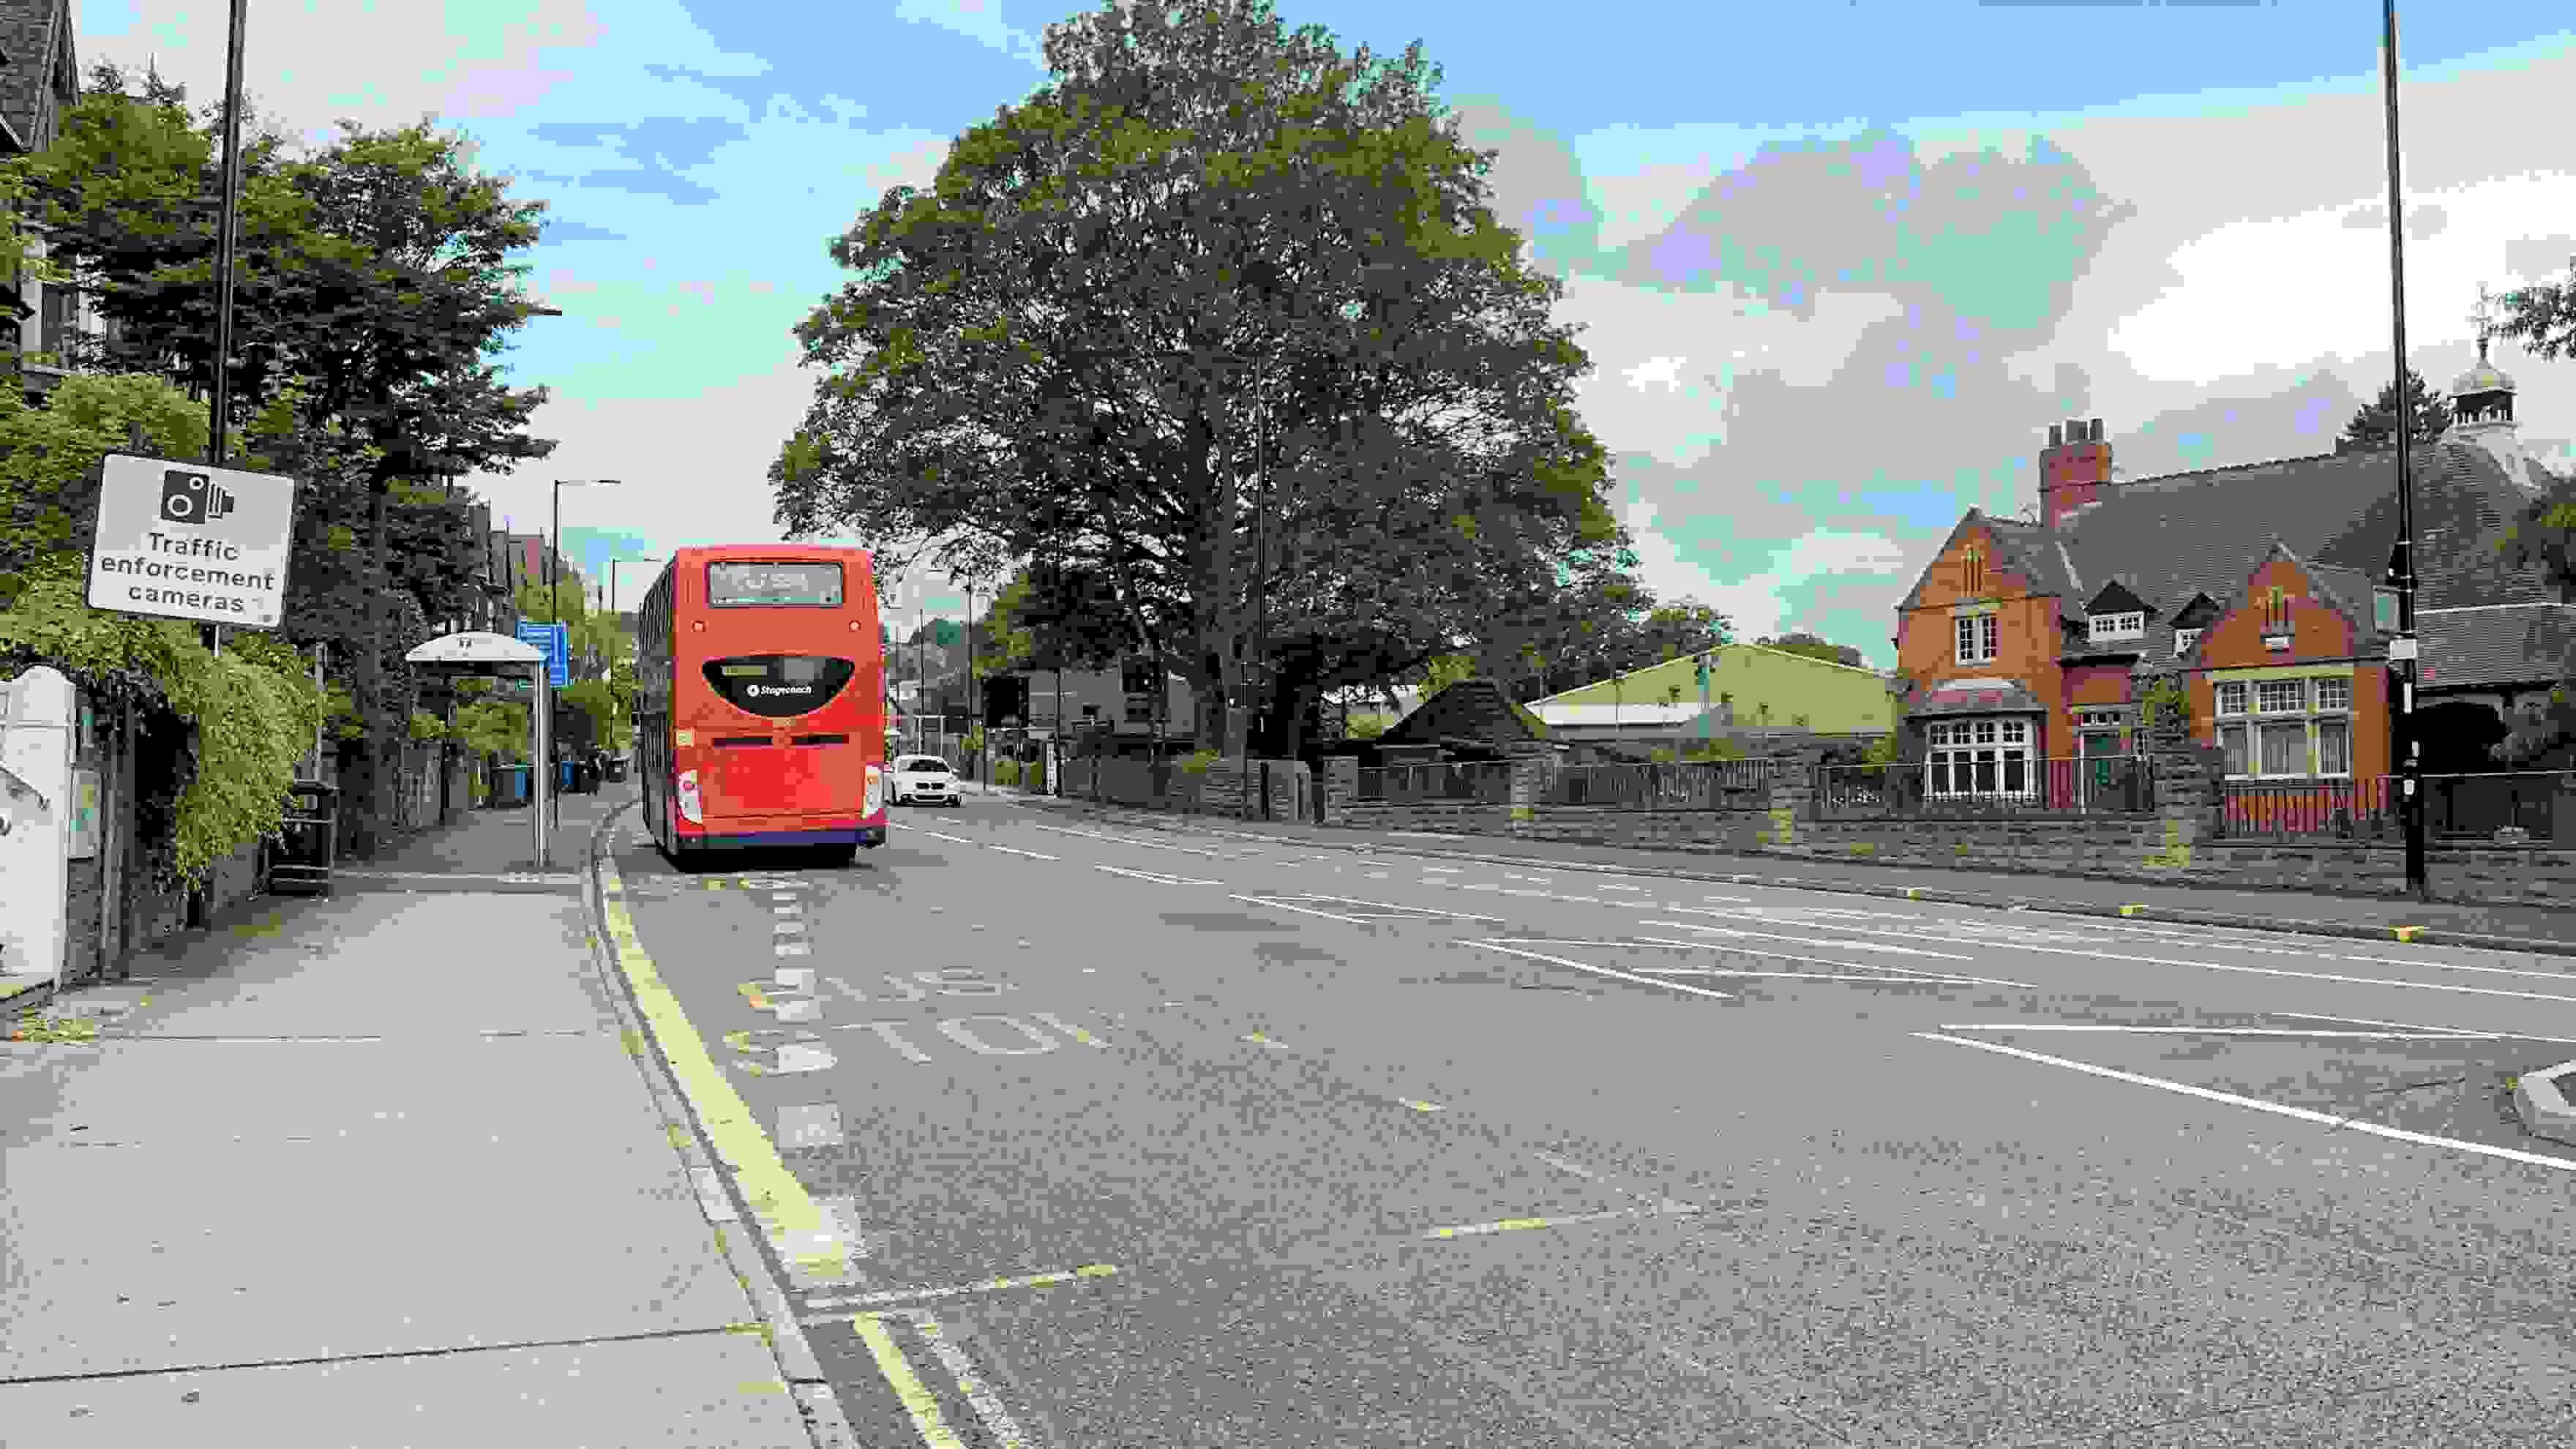 A bus on Ecclesall Road